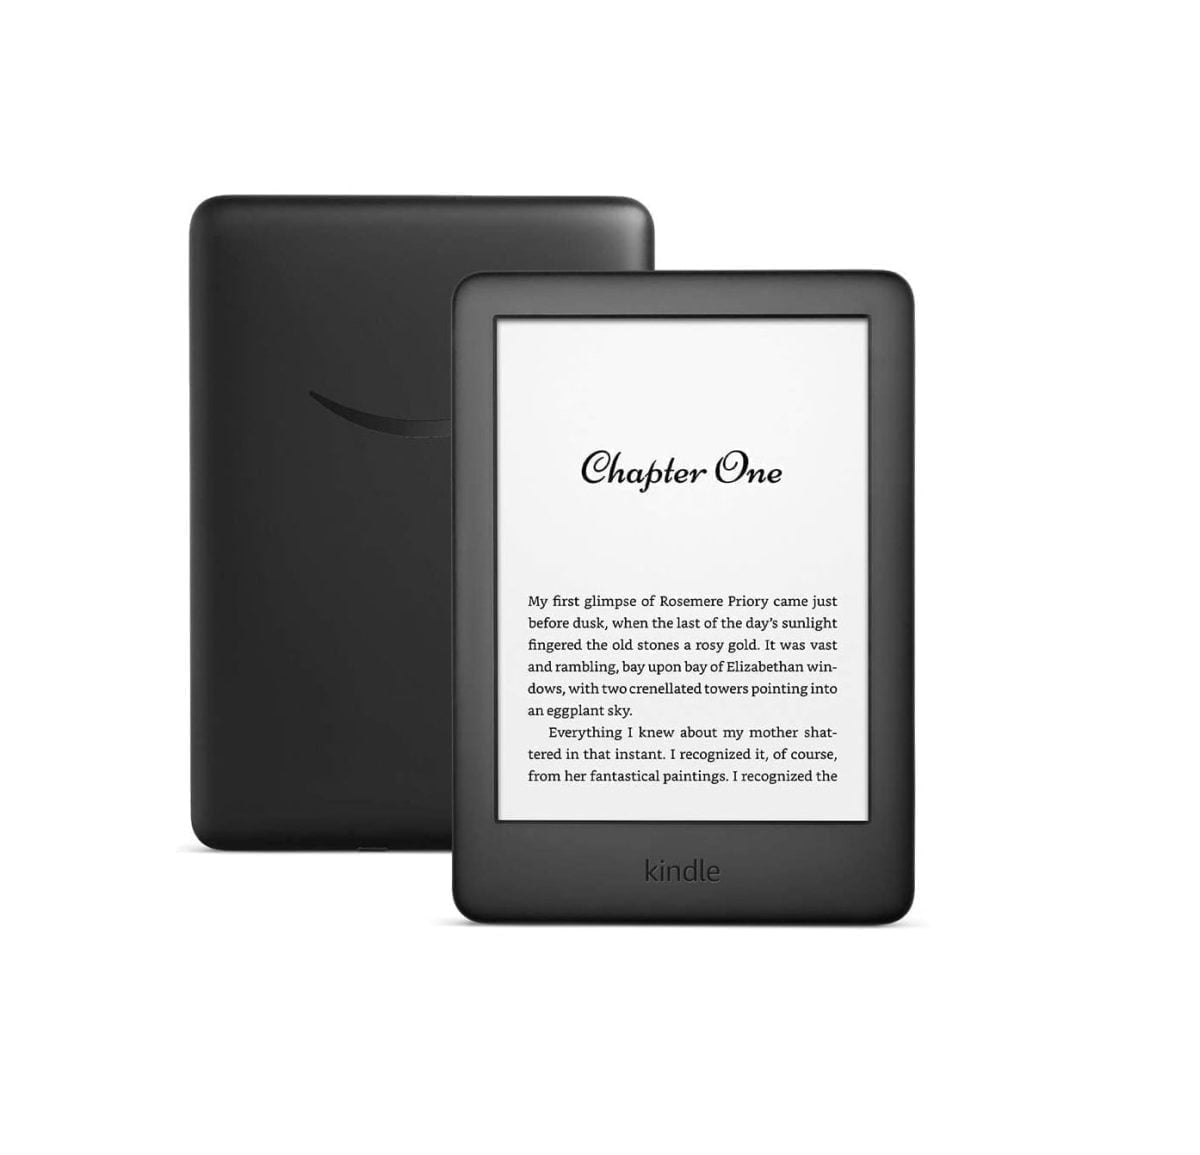 51Mi8Grndql. Ac Sl1000 Amazon &Amp;Lt;H1&Amp;Gt;All-New Kindle (10Th Gen), 6&Amp;Quot; Display Now With Built-In Light, 8 Gb, Wi-Fi, Black&Amp;Lt;/H1&Amp;Gt; &Amp;Lt;Ul Class=&Amp;Quot;A-Unordered-List A-Vertical A-Spacing-Mini&Amp;Quot;&Amp;Gt; &Amp;Lt;Li&Amp;Gt;&Amp;Lt;Span Class=&Amp;Quot;A-List-Item&Amp;Quot;&Amp;Gt;Adjustable Front Light Lets You Read Comfortably For Hours—Indoors And Outdoors, Day And Night.&Amp;Lt;/Span&Amp;Gt;&Amp;Lt;/Li&Amp;Gt; &Amp;Lt;Li&Amp;Gt;&Amp;Lt;Span Class=&Amp;Quot;A-List-Item&Amp;Quot;&Amp;Gt;Purpose-Built For Reading, With A 167 Ppi Glare-Free Display That Reads Like Real Paper, Even In Direct Sunlight.&Amp;Lt;/Span&Amp;Gt;&Amp;Lt;/Li&Amp;Gt; &Amp;Lt;Li&Amp;Gt;&Amp;Lt;Span Class=&Amp;Quot;A-List-Item&Amp;Quot;&Amp;Gt;Read Distraction-Free. Highlight Passages, Look Up Definitions, Translate Words, And Adjust Text Size—Without Ever Leaving The Page.&Amp;Lt;/Span&Amp;Gt;&Amp;Lt;/Li&Amp;Gt; &Amp;Lt;Li&Amp;Gt;&Amp;Lt;Span Class=&Amp;Quot;A-List-Item&Amp;Quot;&Amp;Gt;A Single Battery Charge Lasts Weeks, Not Hours.&Amp;Lt;/Span&Amp;Gt;&Amp;Lt;/Li&Amp;Gt; &Amp;Lt;Li&Amp;Gt;&Amp;Lt;Span Class=&Amp;Quot;A-List-Item&Amp;Quot;&Amp;Gt;Browse Over 1 Million Ebooks In The Kindle Store On Amazon &Amp;Lt;/Span&Amp;Gt;&Amp;Lt;/Li&Amp;Gt; &Amp;Lt;/Ul&Amp;Gt; Amazon Kindel Kindle (10Th Gen), 6&Amp;Quot; Display Now With Built-In Light, 8 Gb, Wi-Fi, Black